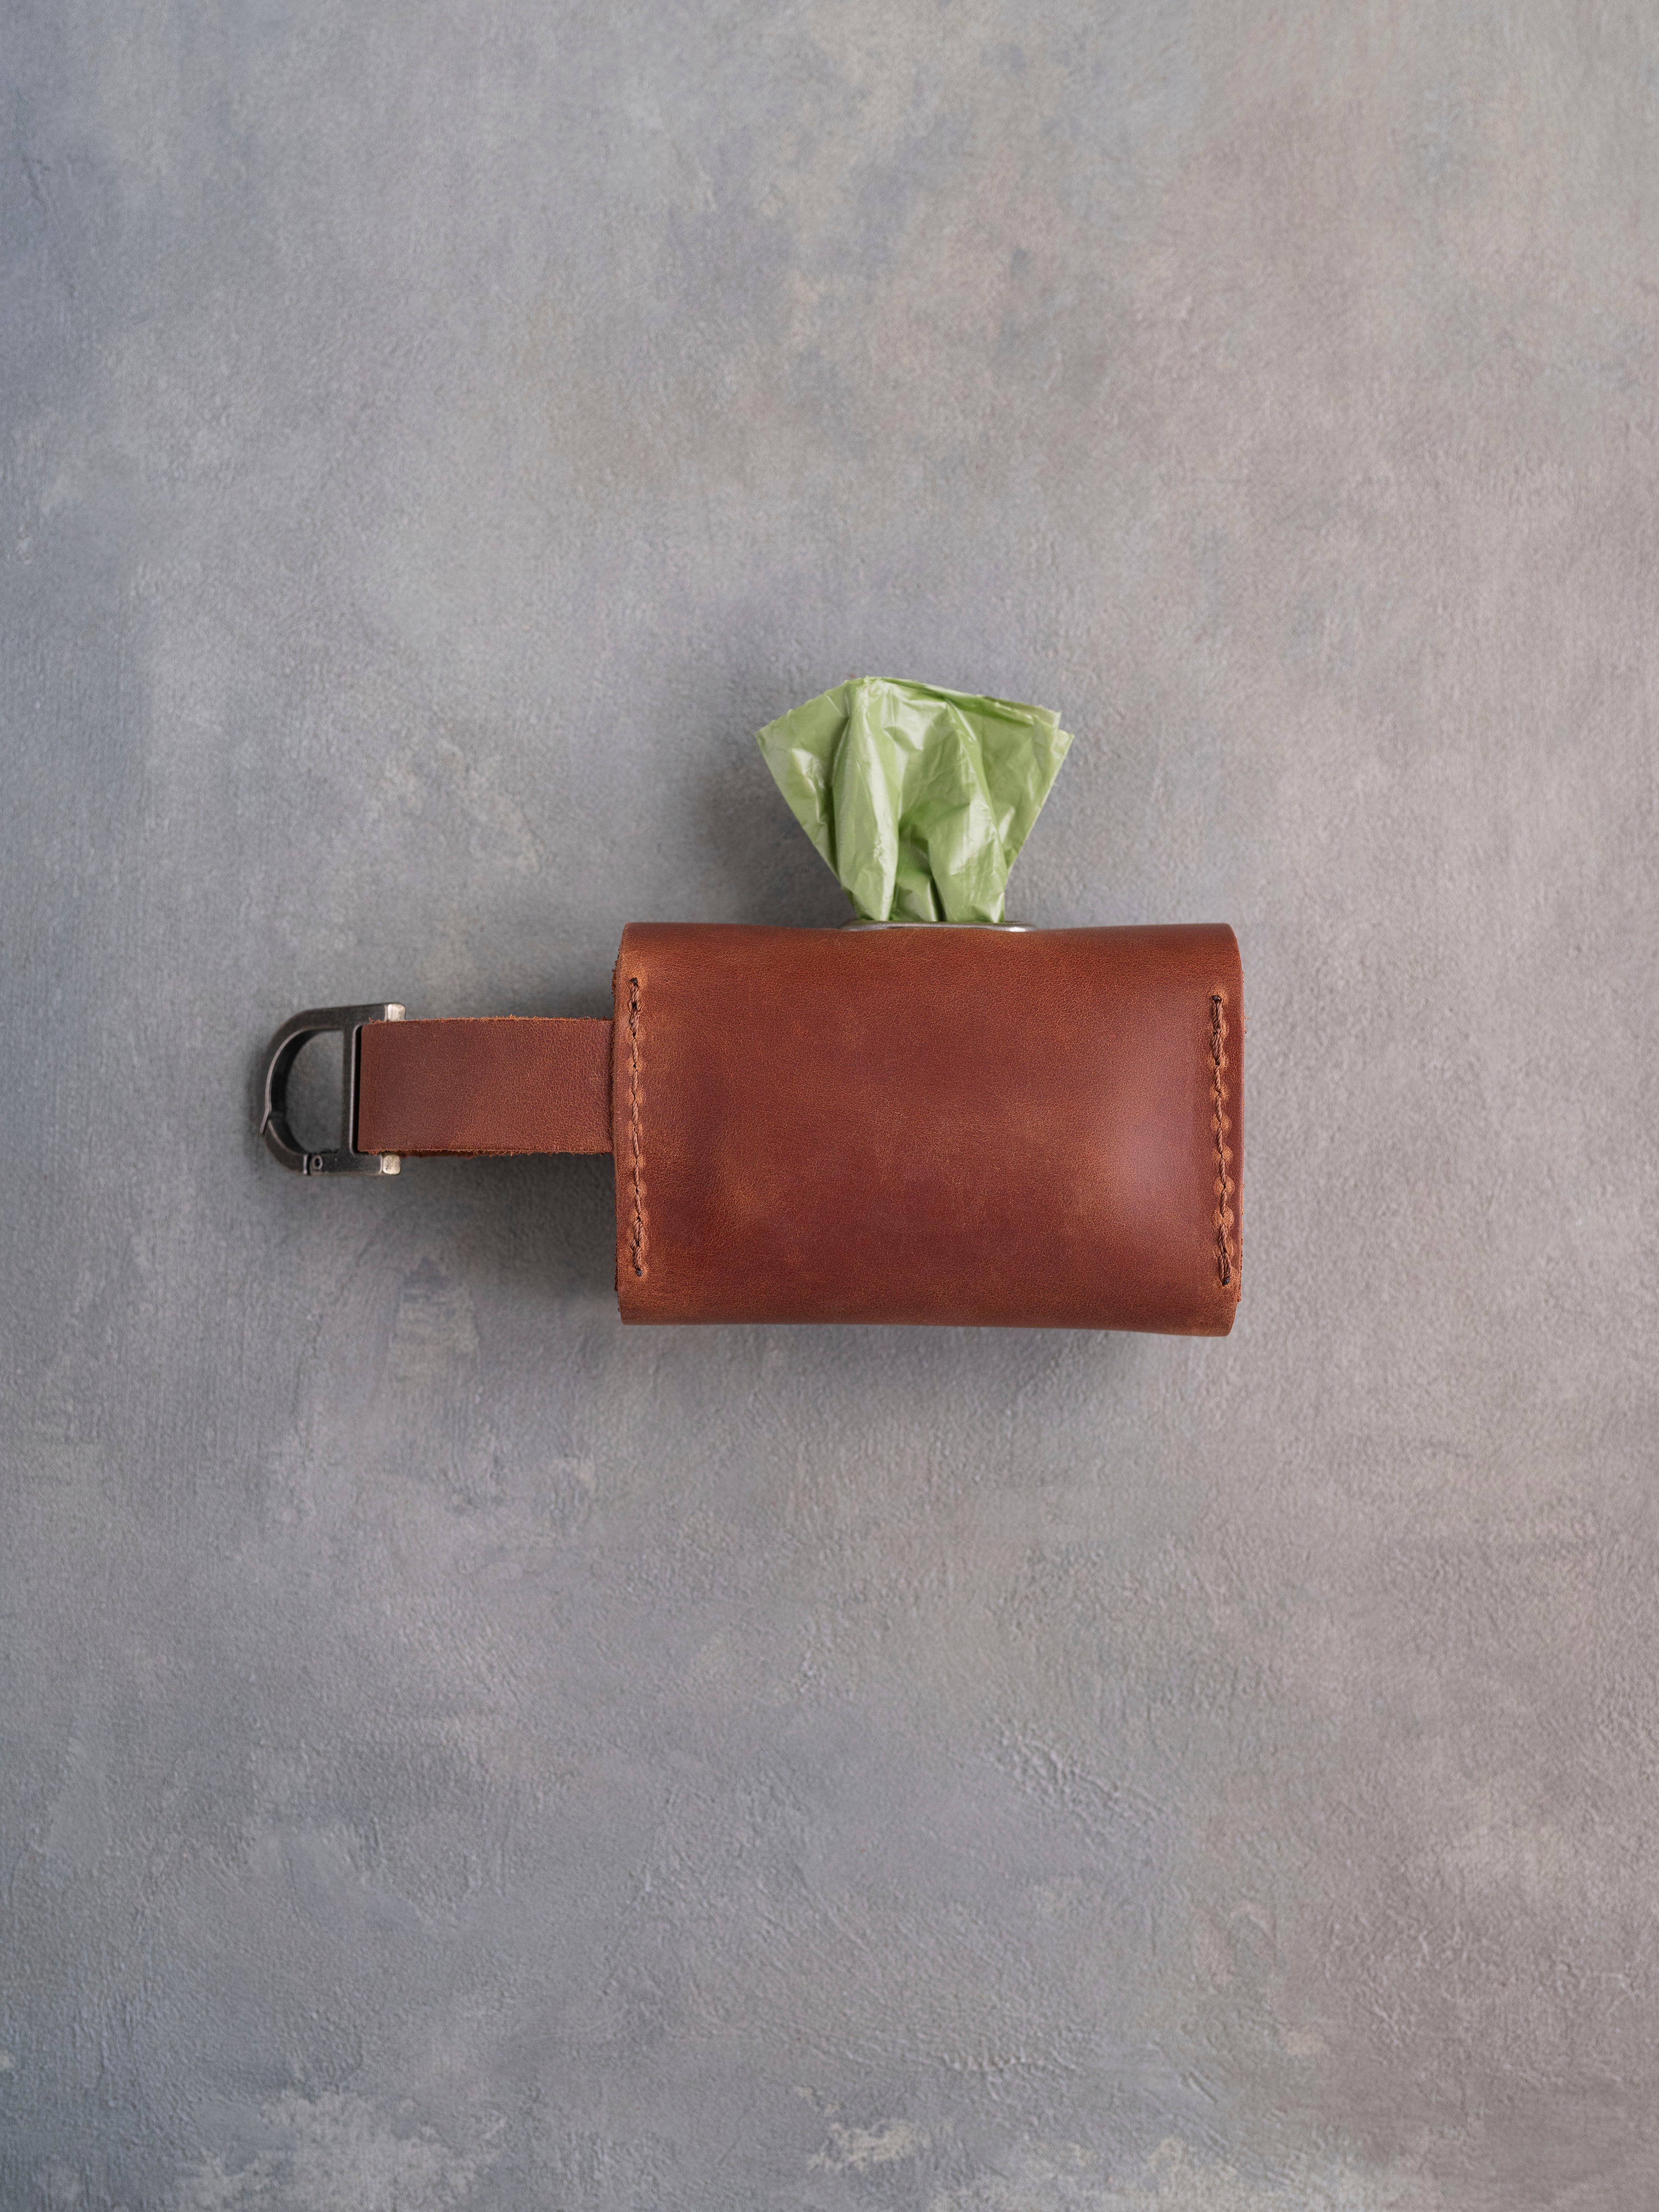 Arizona Leather Dog Poop Bag Holder with button closure